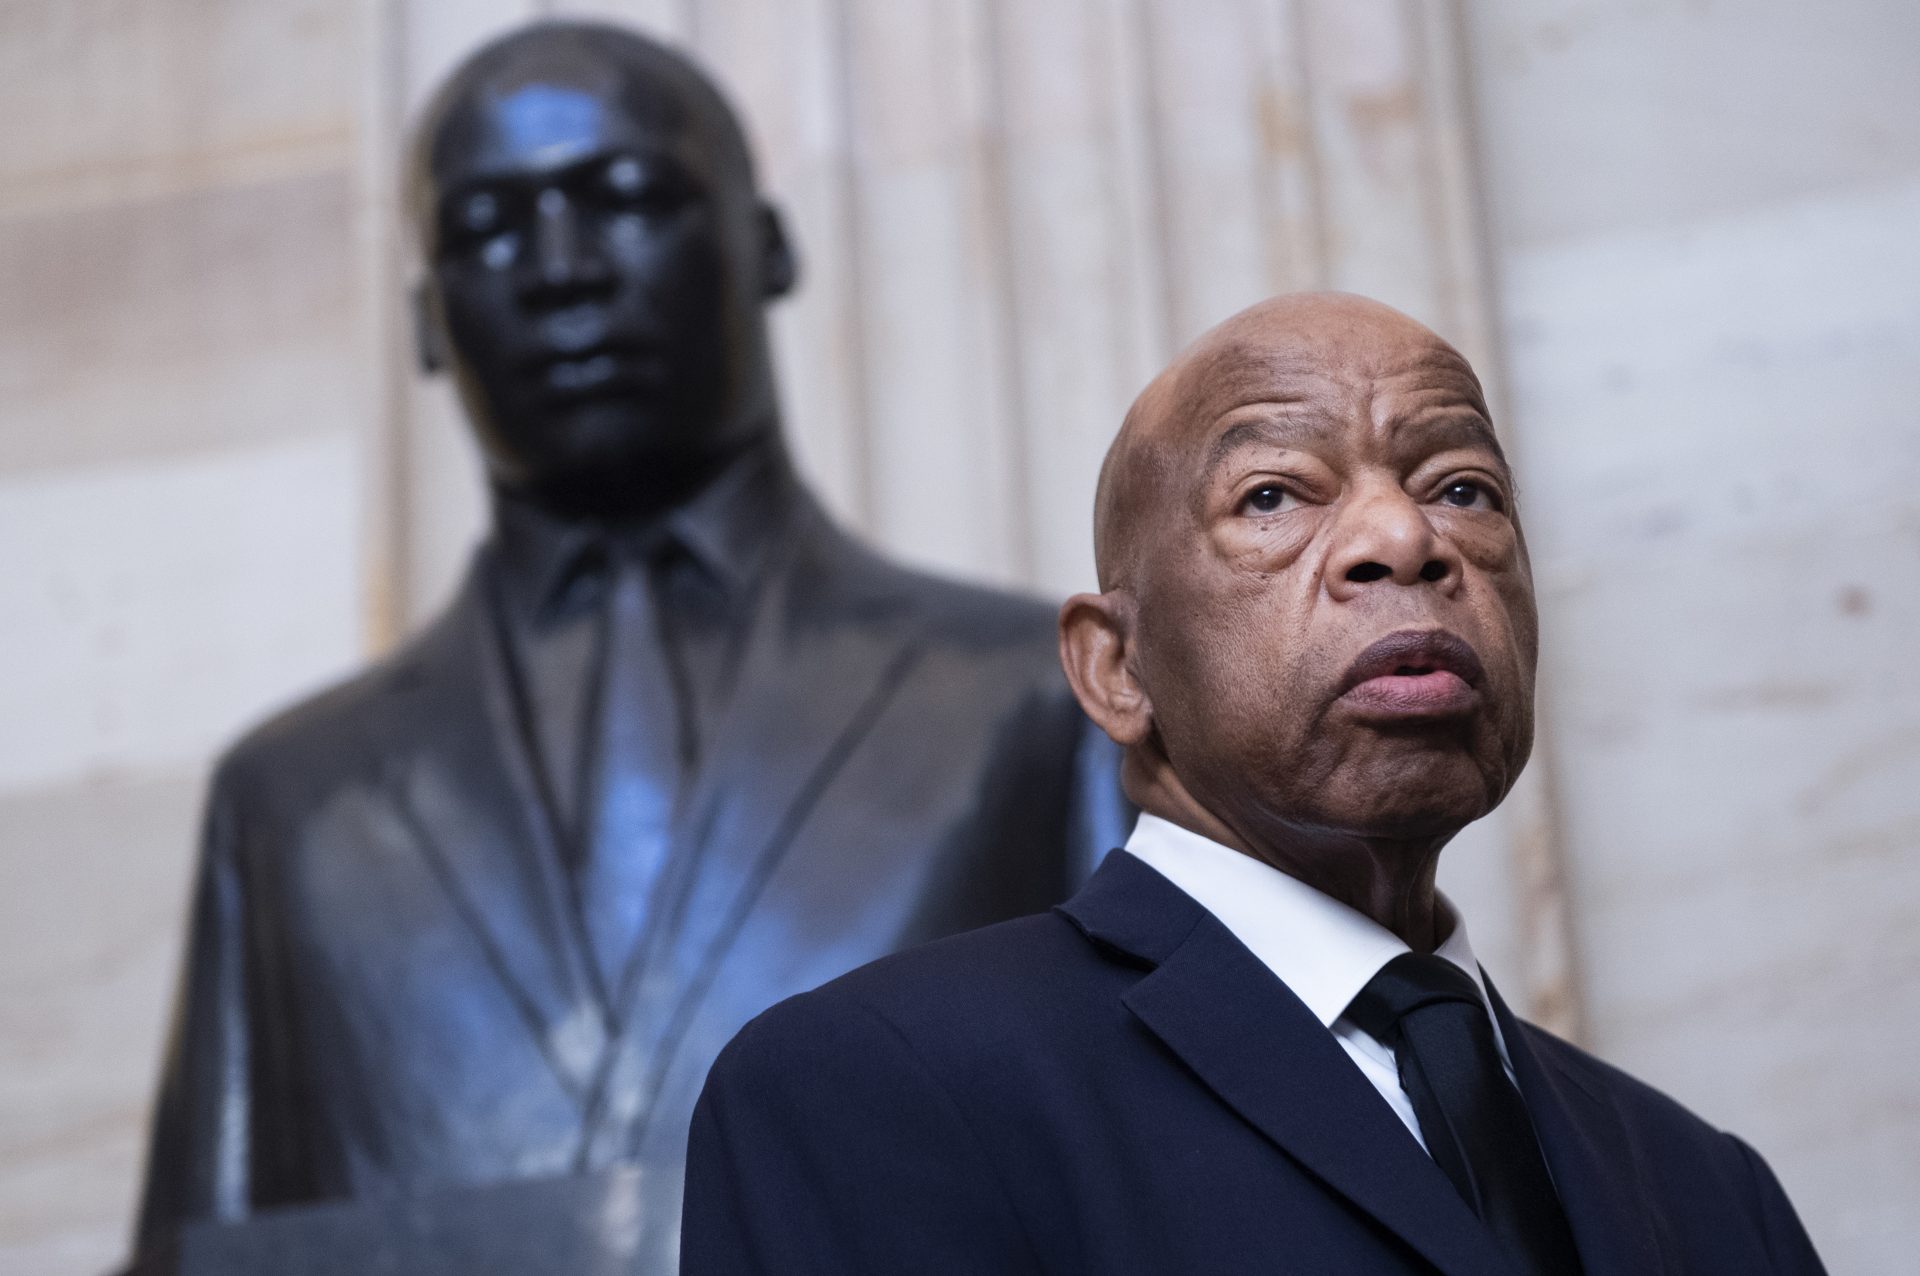 Georgia Rep. John Lewis near the statue of Martin Luther King Jr. in the Capitol Rotunda in Washington, D.C., earlier this year. At StoryCorps in 2018, Lewis talked about meeting King in Montgomery, Ala., at 18.